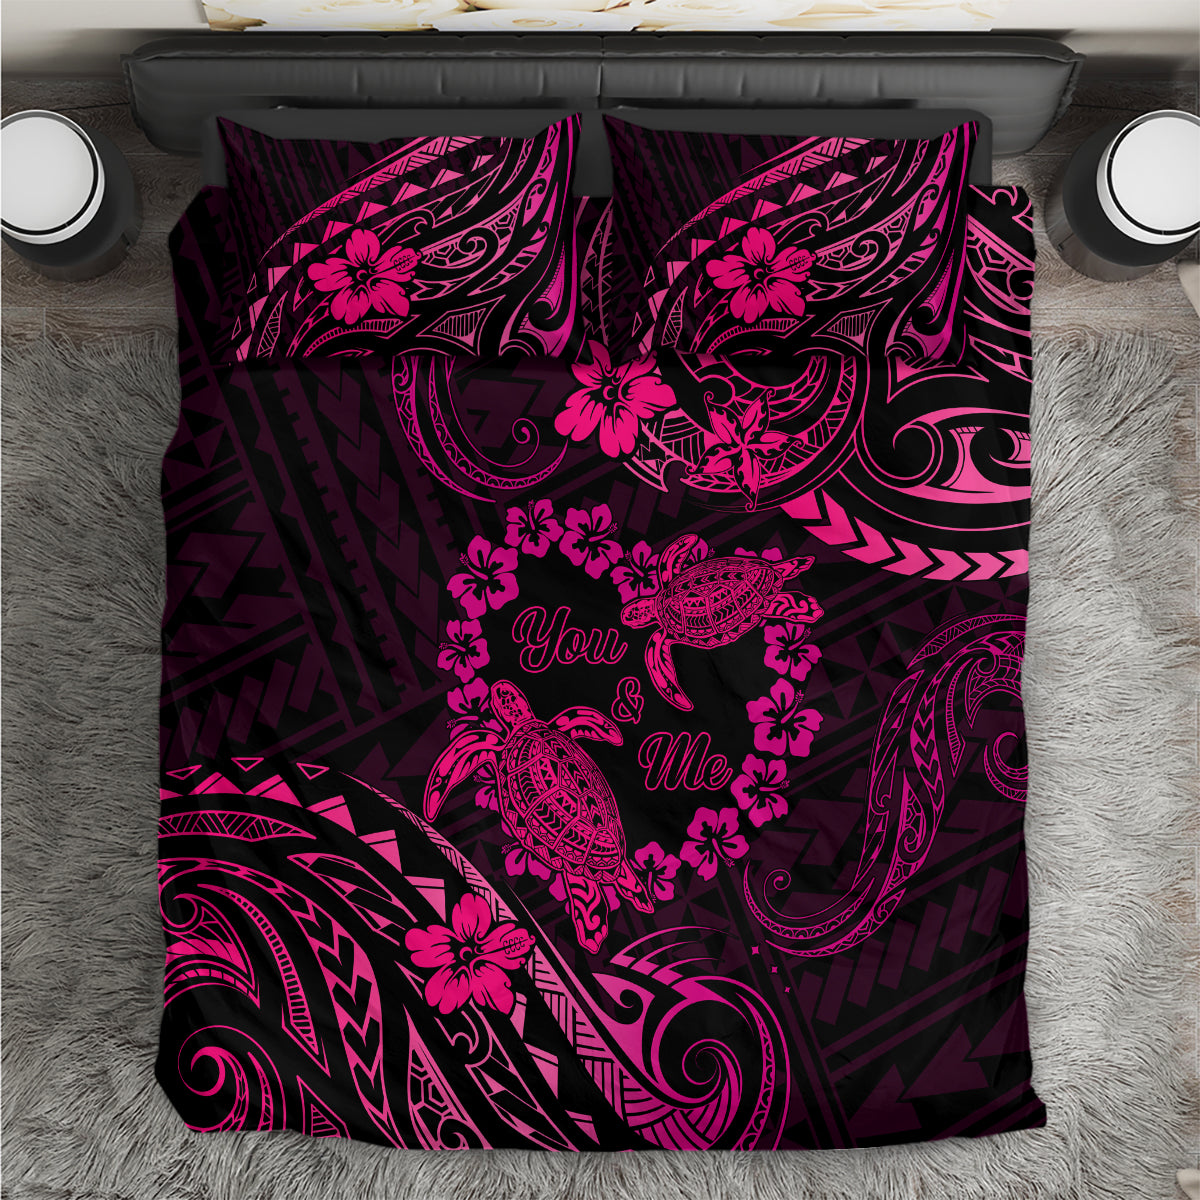 Polynesian Turtle Valentine Bedding Set You And Me Pink Hibiscus Heart LT01 Pink - Polynesian Pride